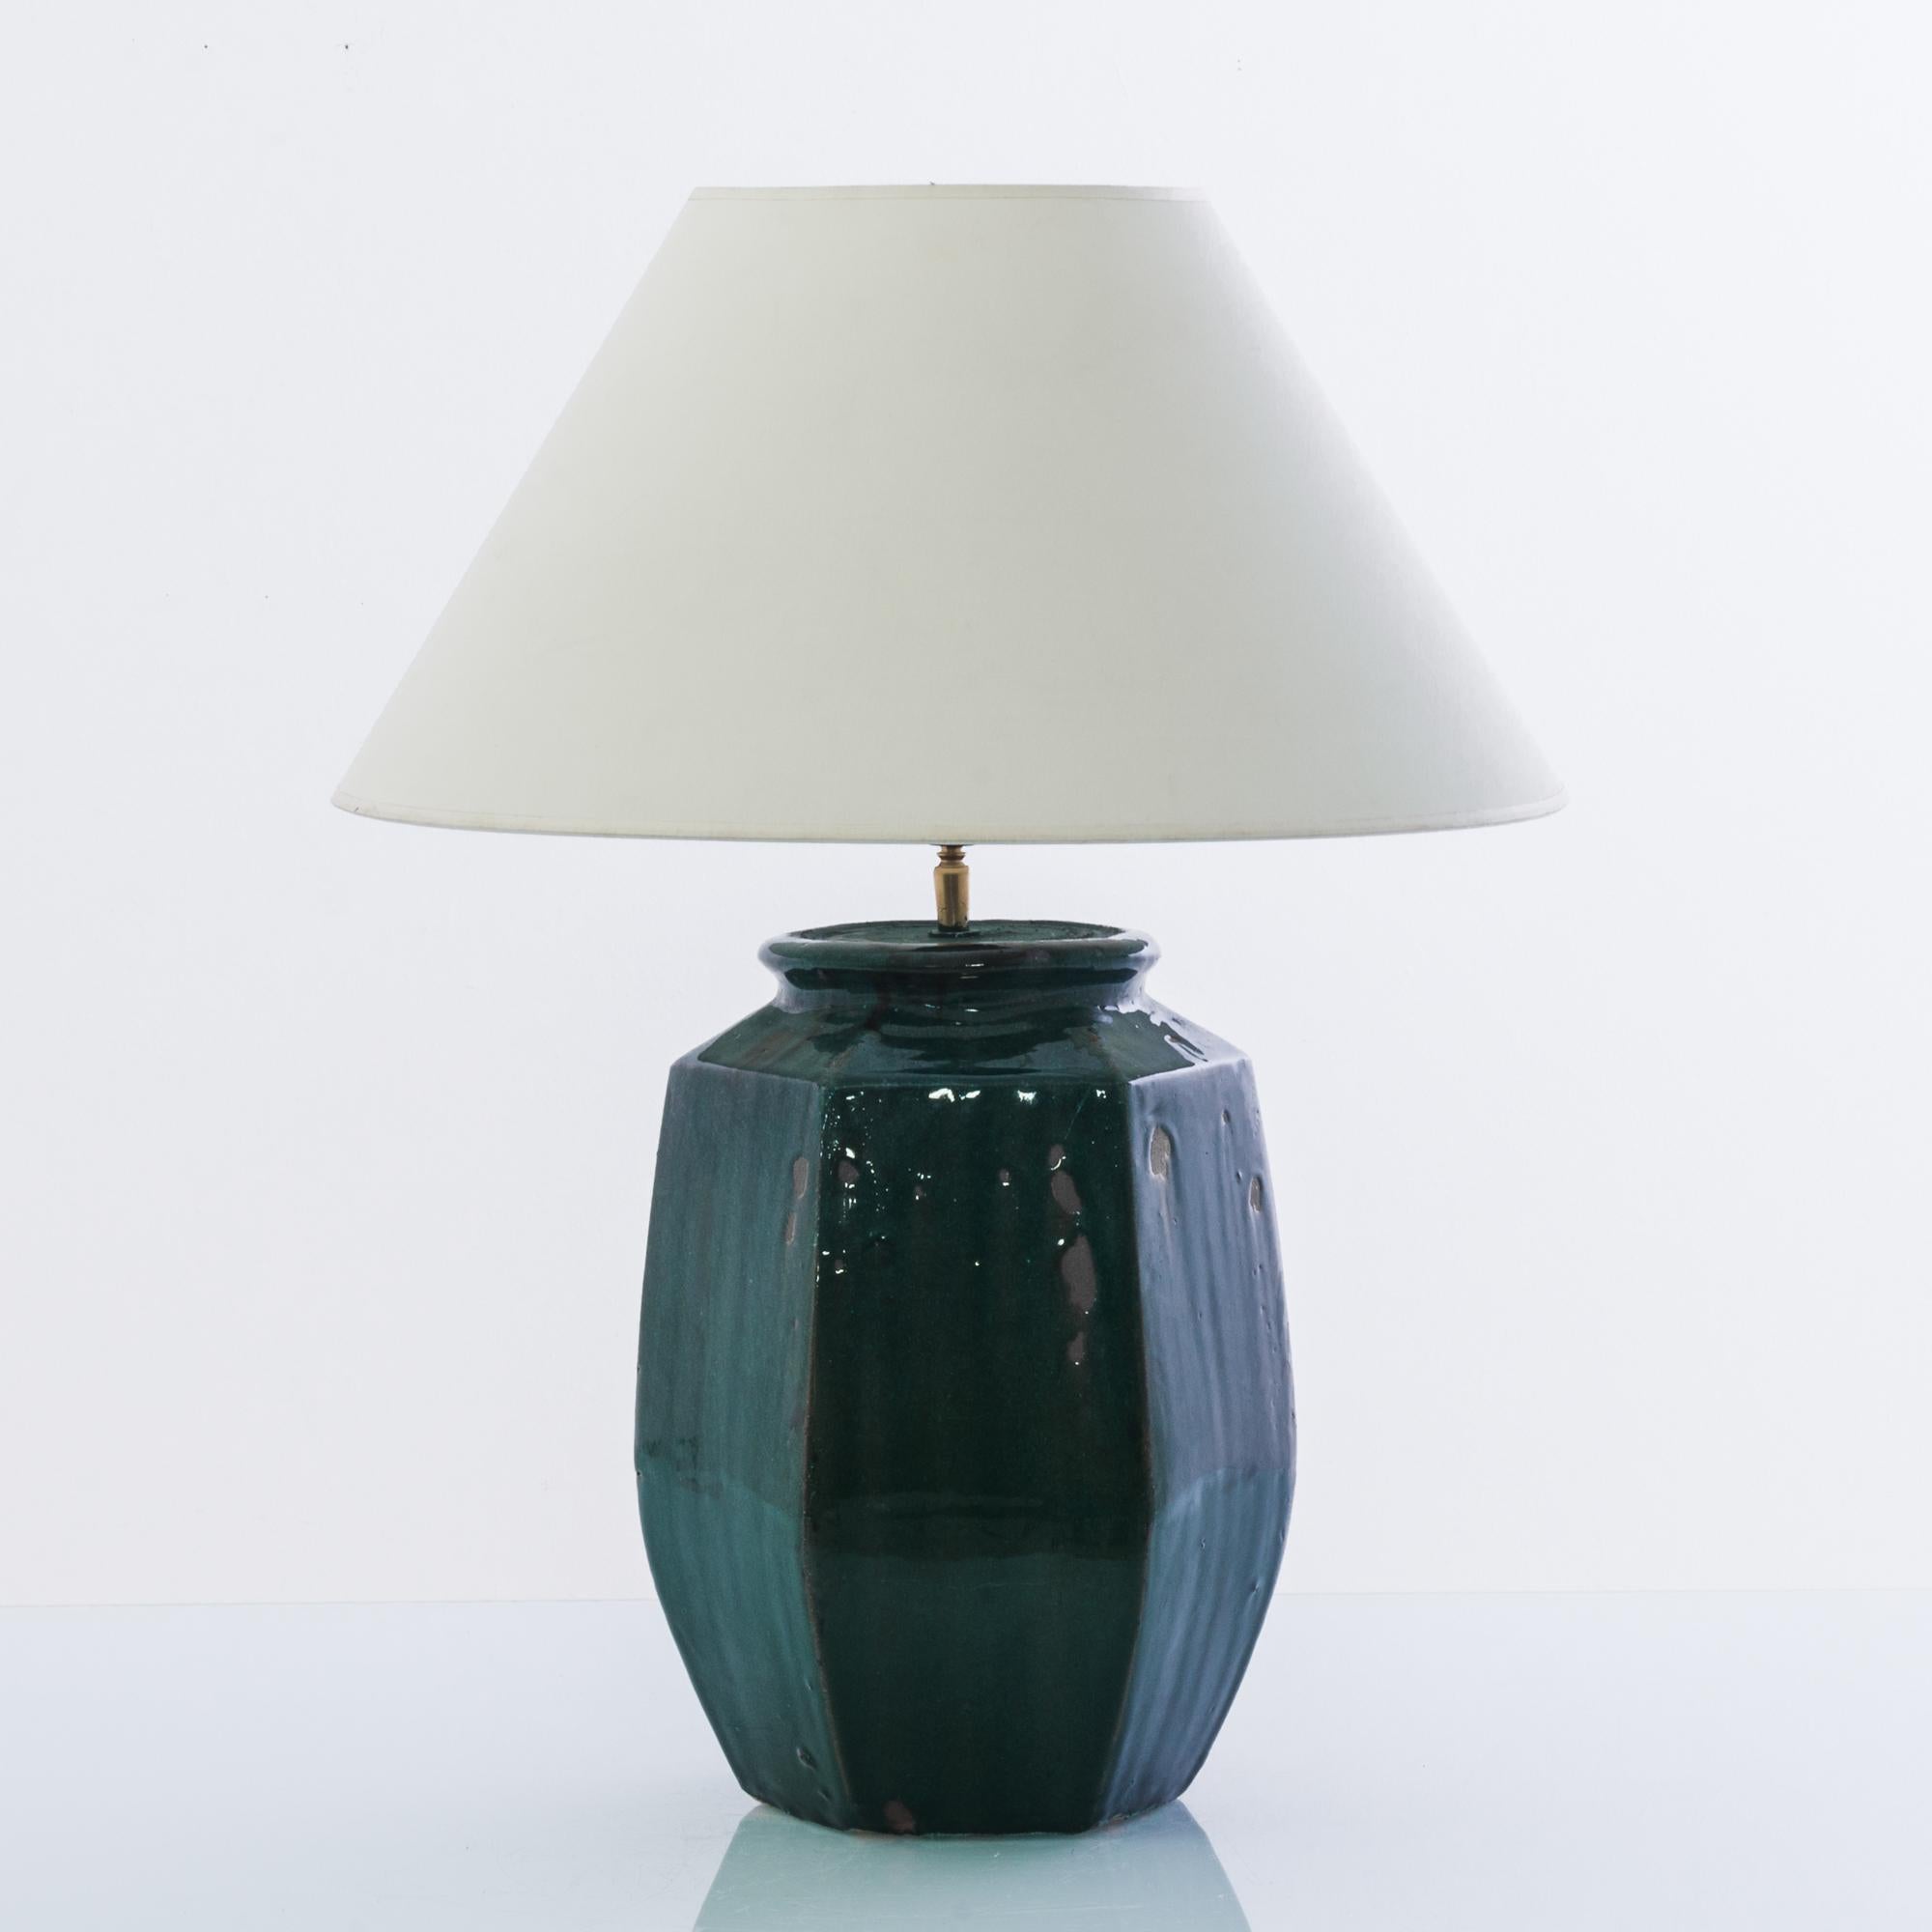 A vintage Chinese vase, fitted with an adjustable brass fixture and E26 lighting socket. The deep tone of the forest green glaze creates a vivid visual impact. Textured glazes, attractive colors and faceted shape grants a sensuous tactility to the